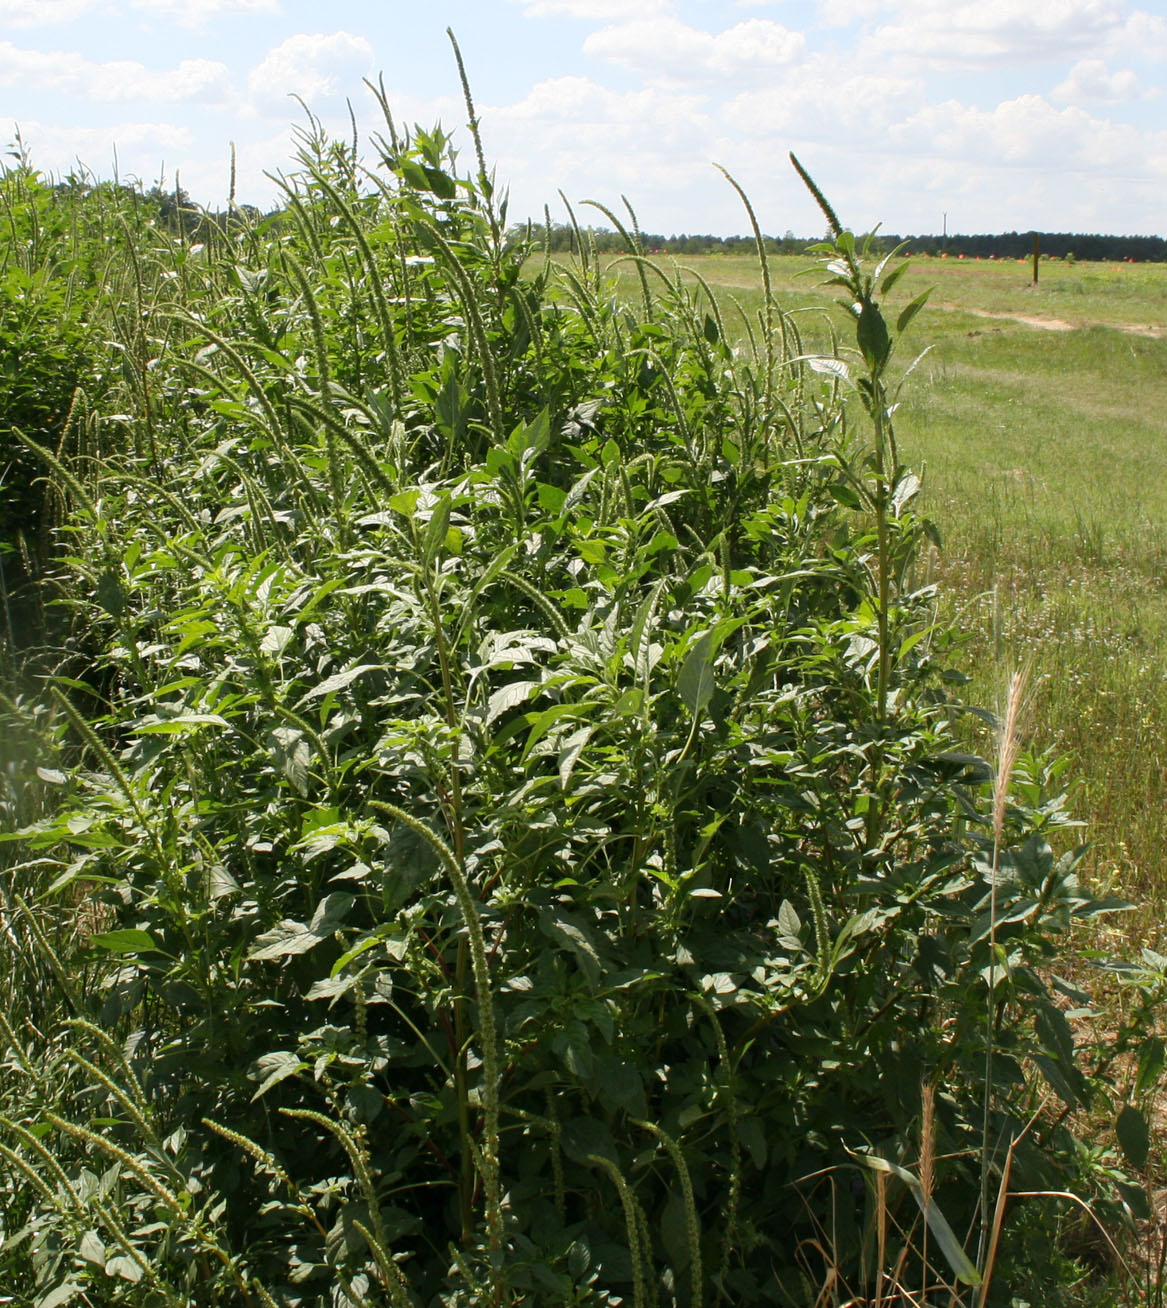 Palmer amaranth, a broadleaf weed pictured here, can reach heights of 7 to 10 feet.